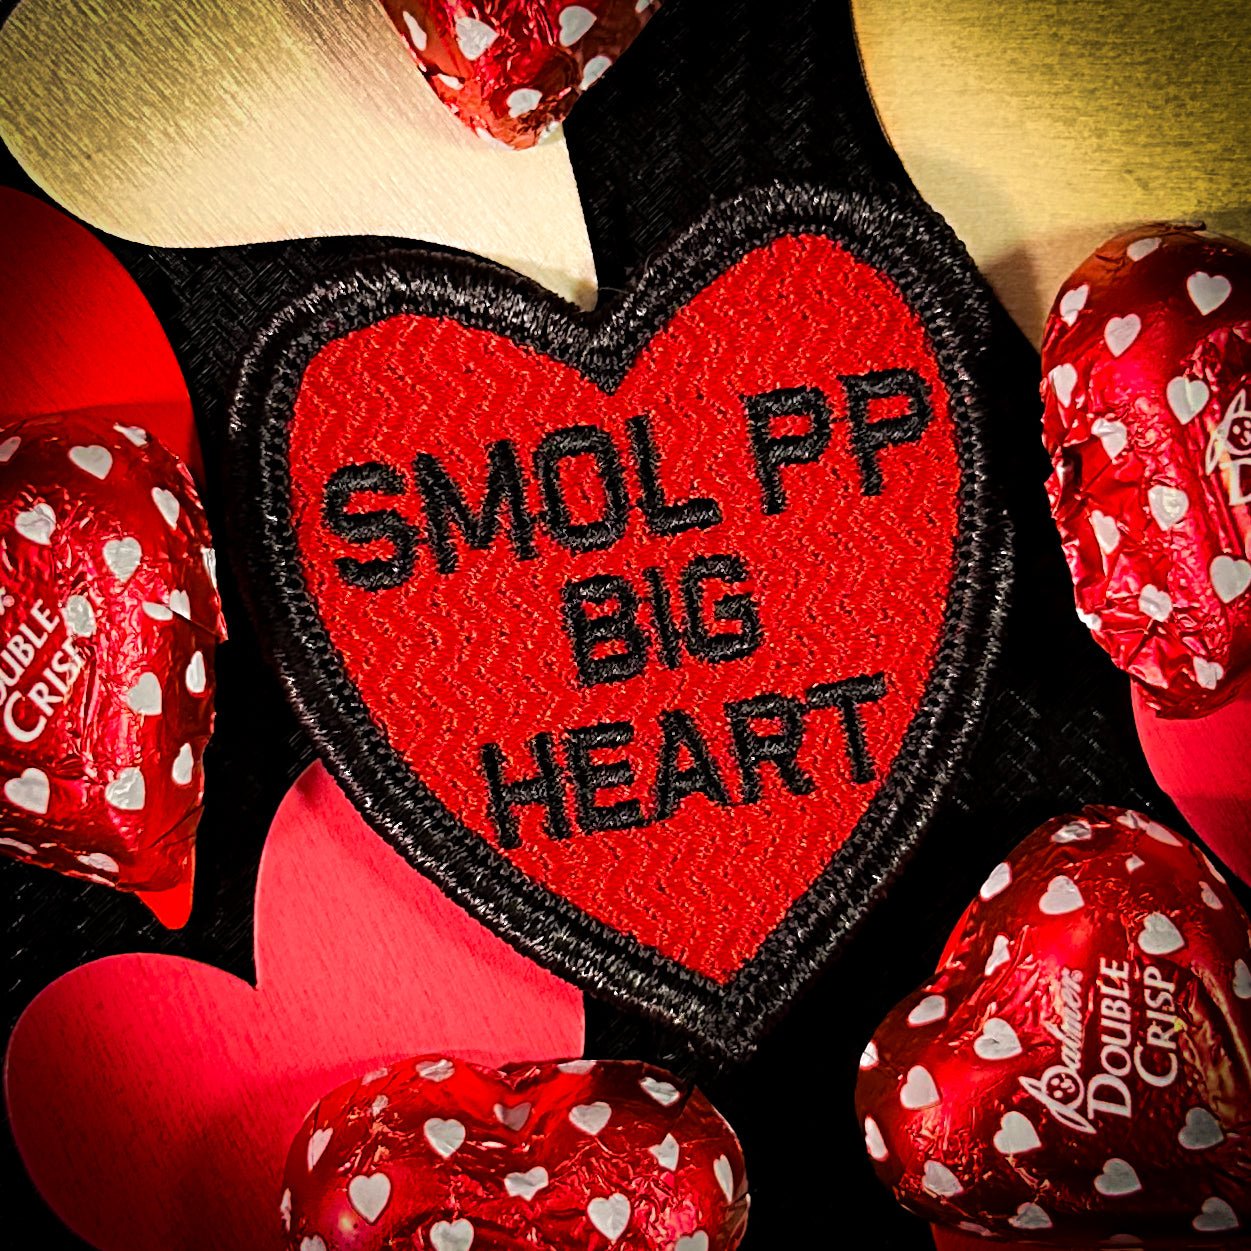 Conversation Style SMOL PP - Big Heart Patch NSFW - 2.5 inches